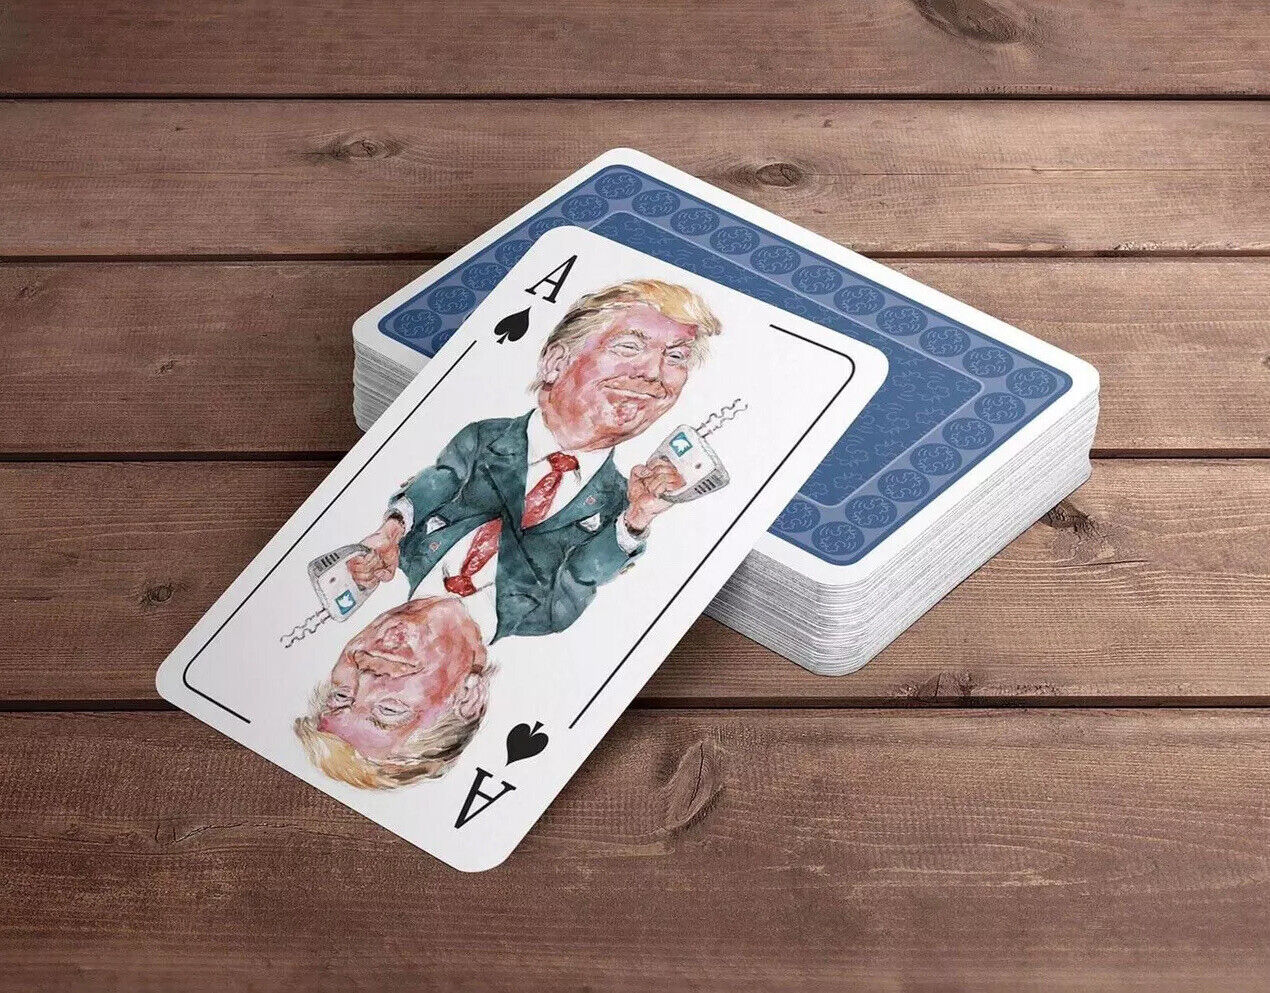 PRESIDENT TRUMP SELF-DEALING PLAYING CARDS Limited Edition MAGA 2020 Collectable